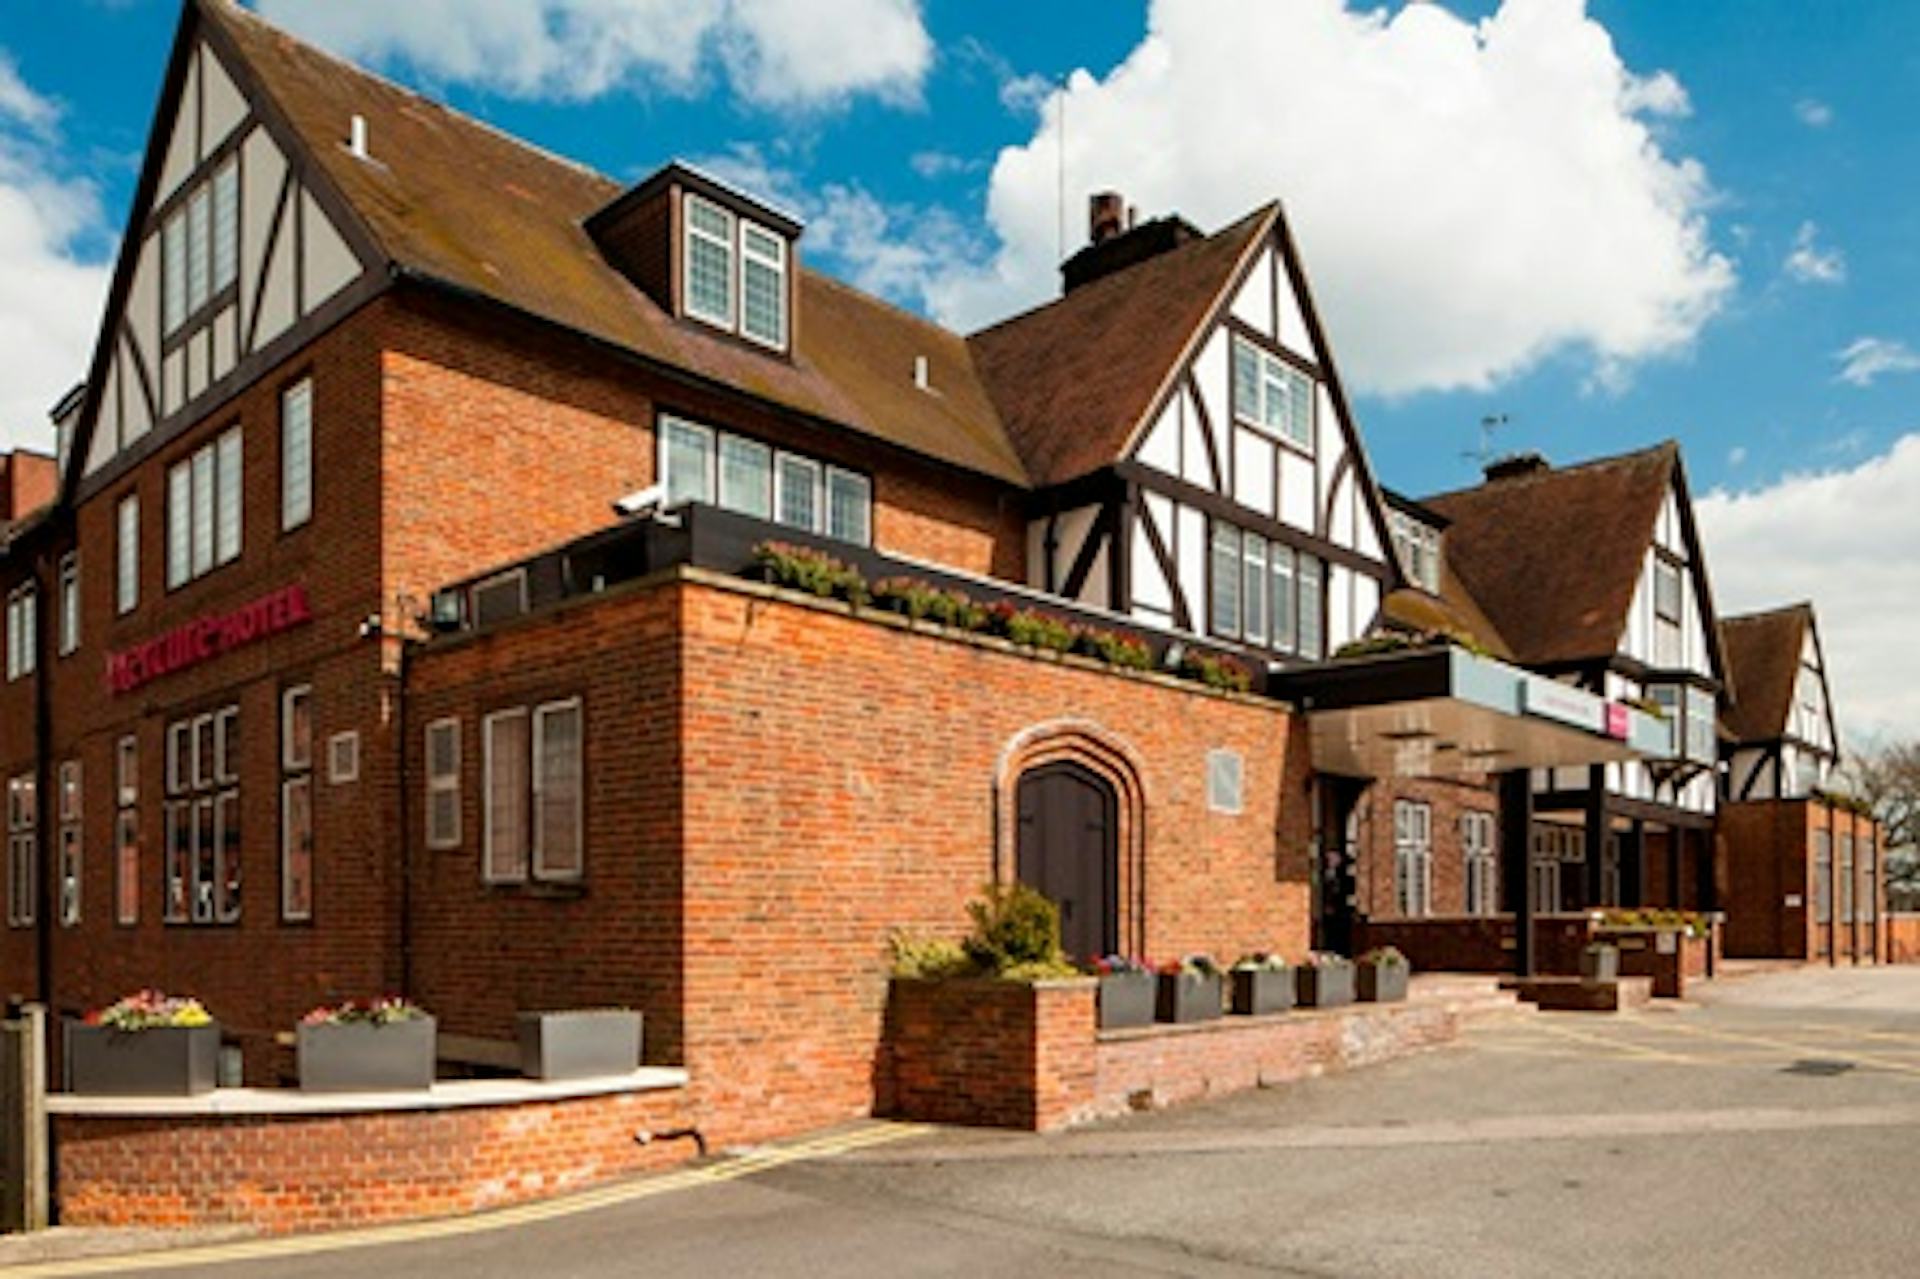 One Night Break for Two at the Leeds Parkway Hotel